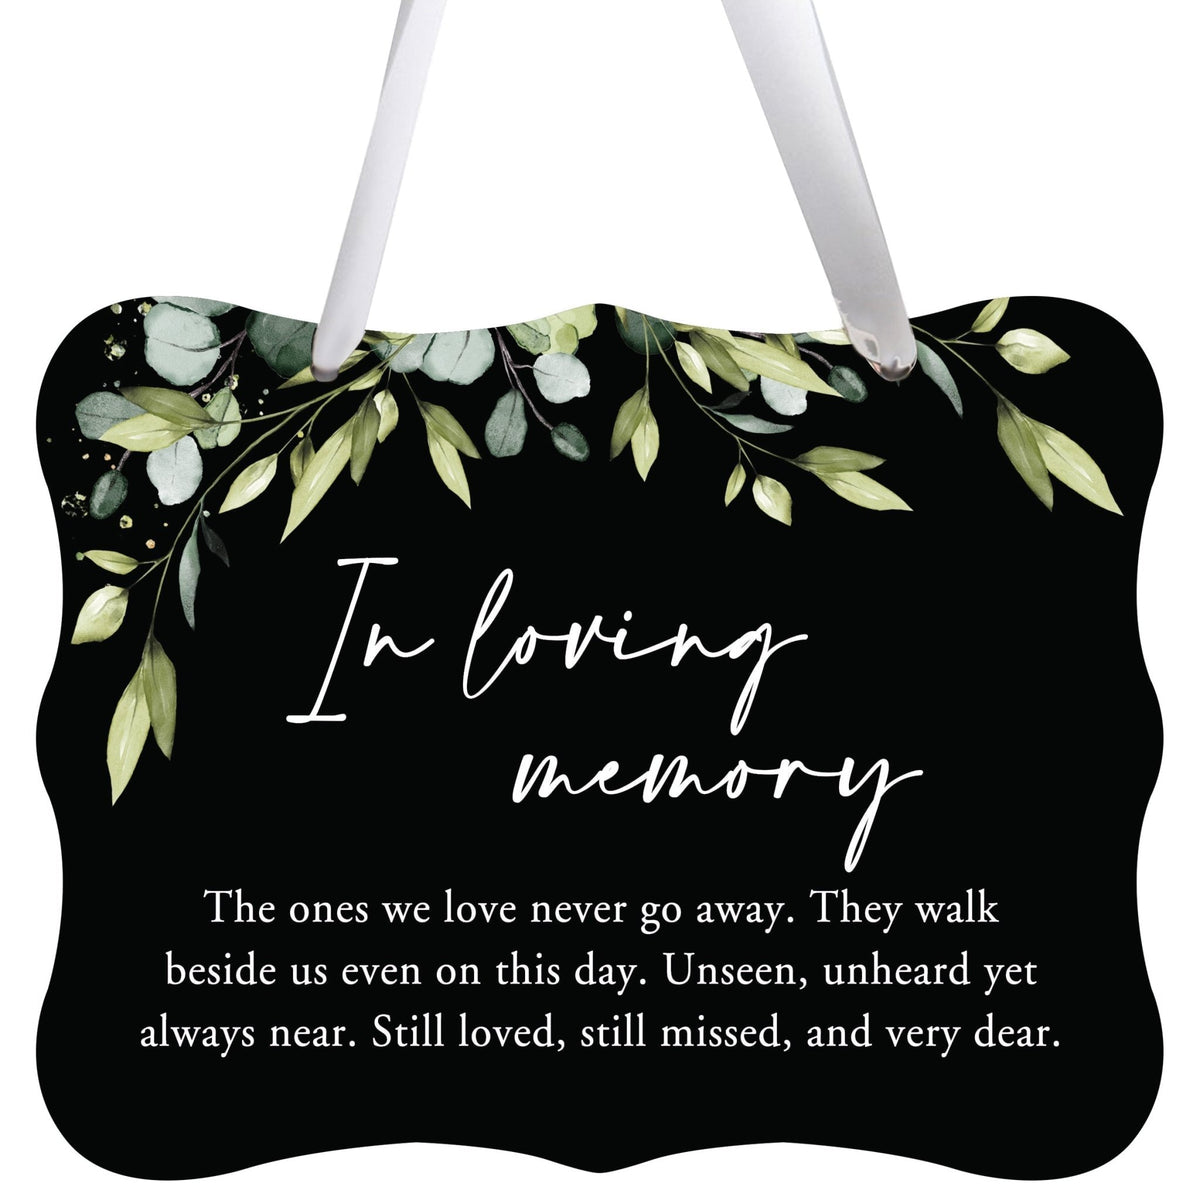 Memorial Hanging Ribbon Wall Decor for Loss of Loved One - In Loving Memory - LifeSong Milestones